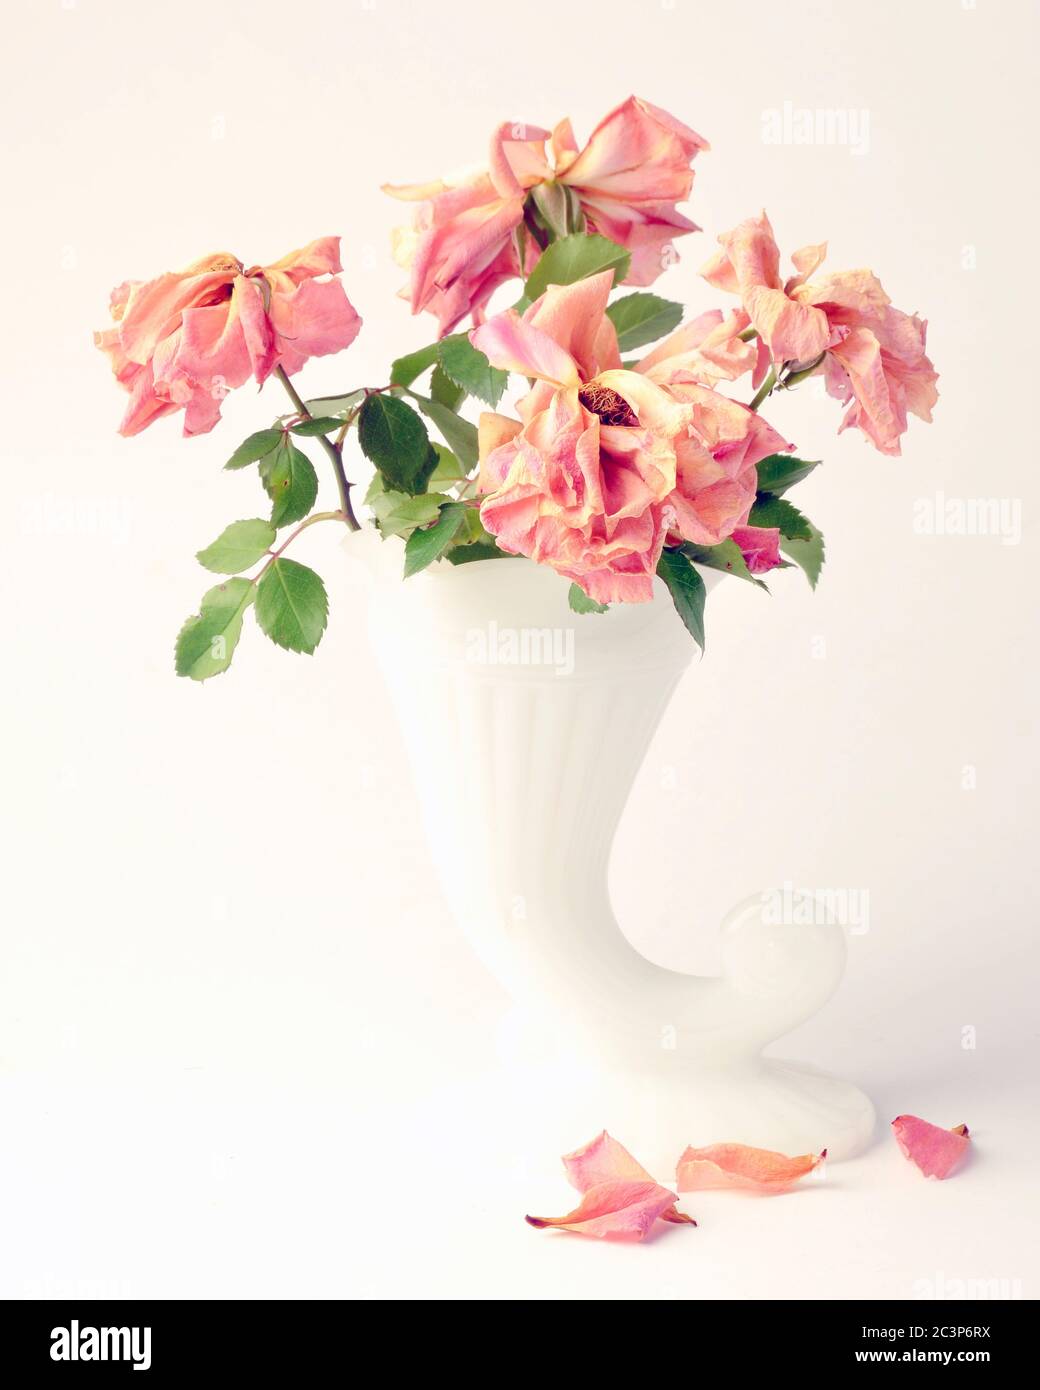 Dead or withered roses in a white vase, with yellow, pink orange flowers studio shot on white background Stock Photo